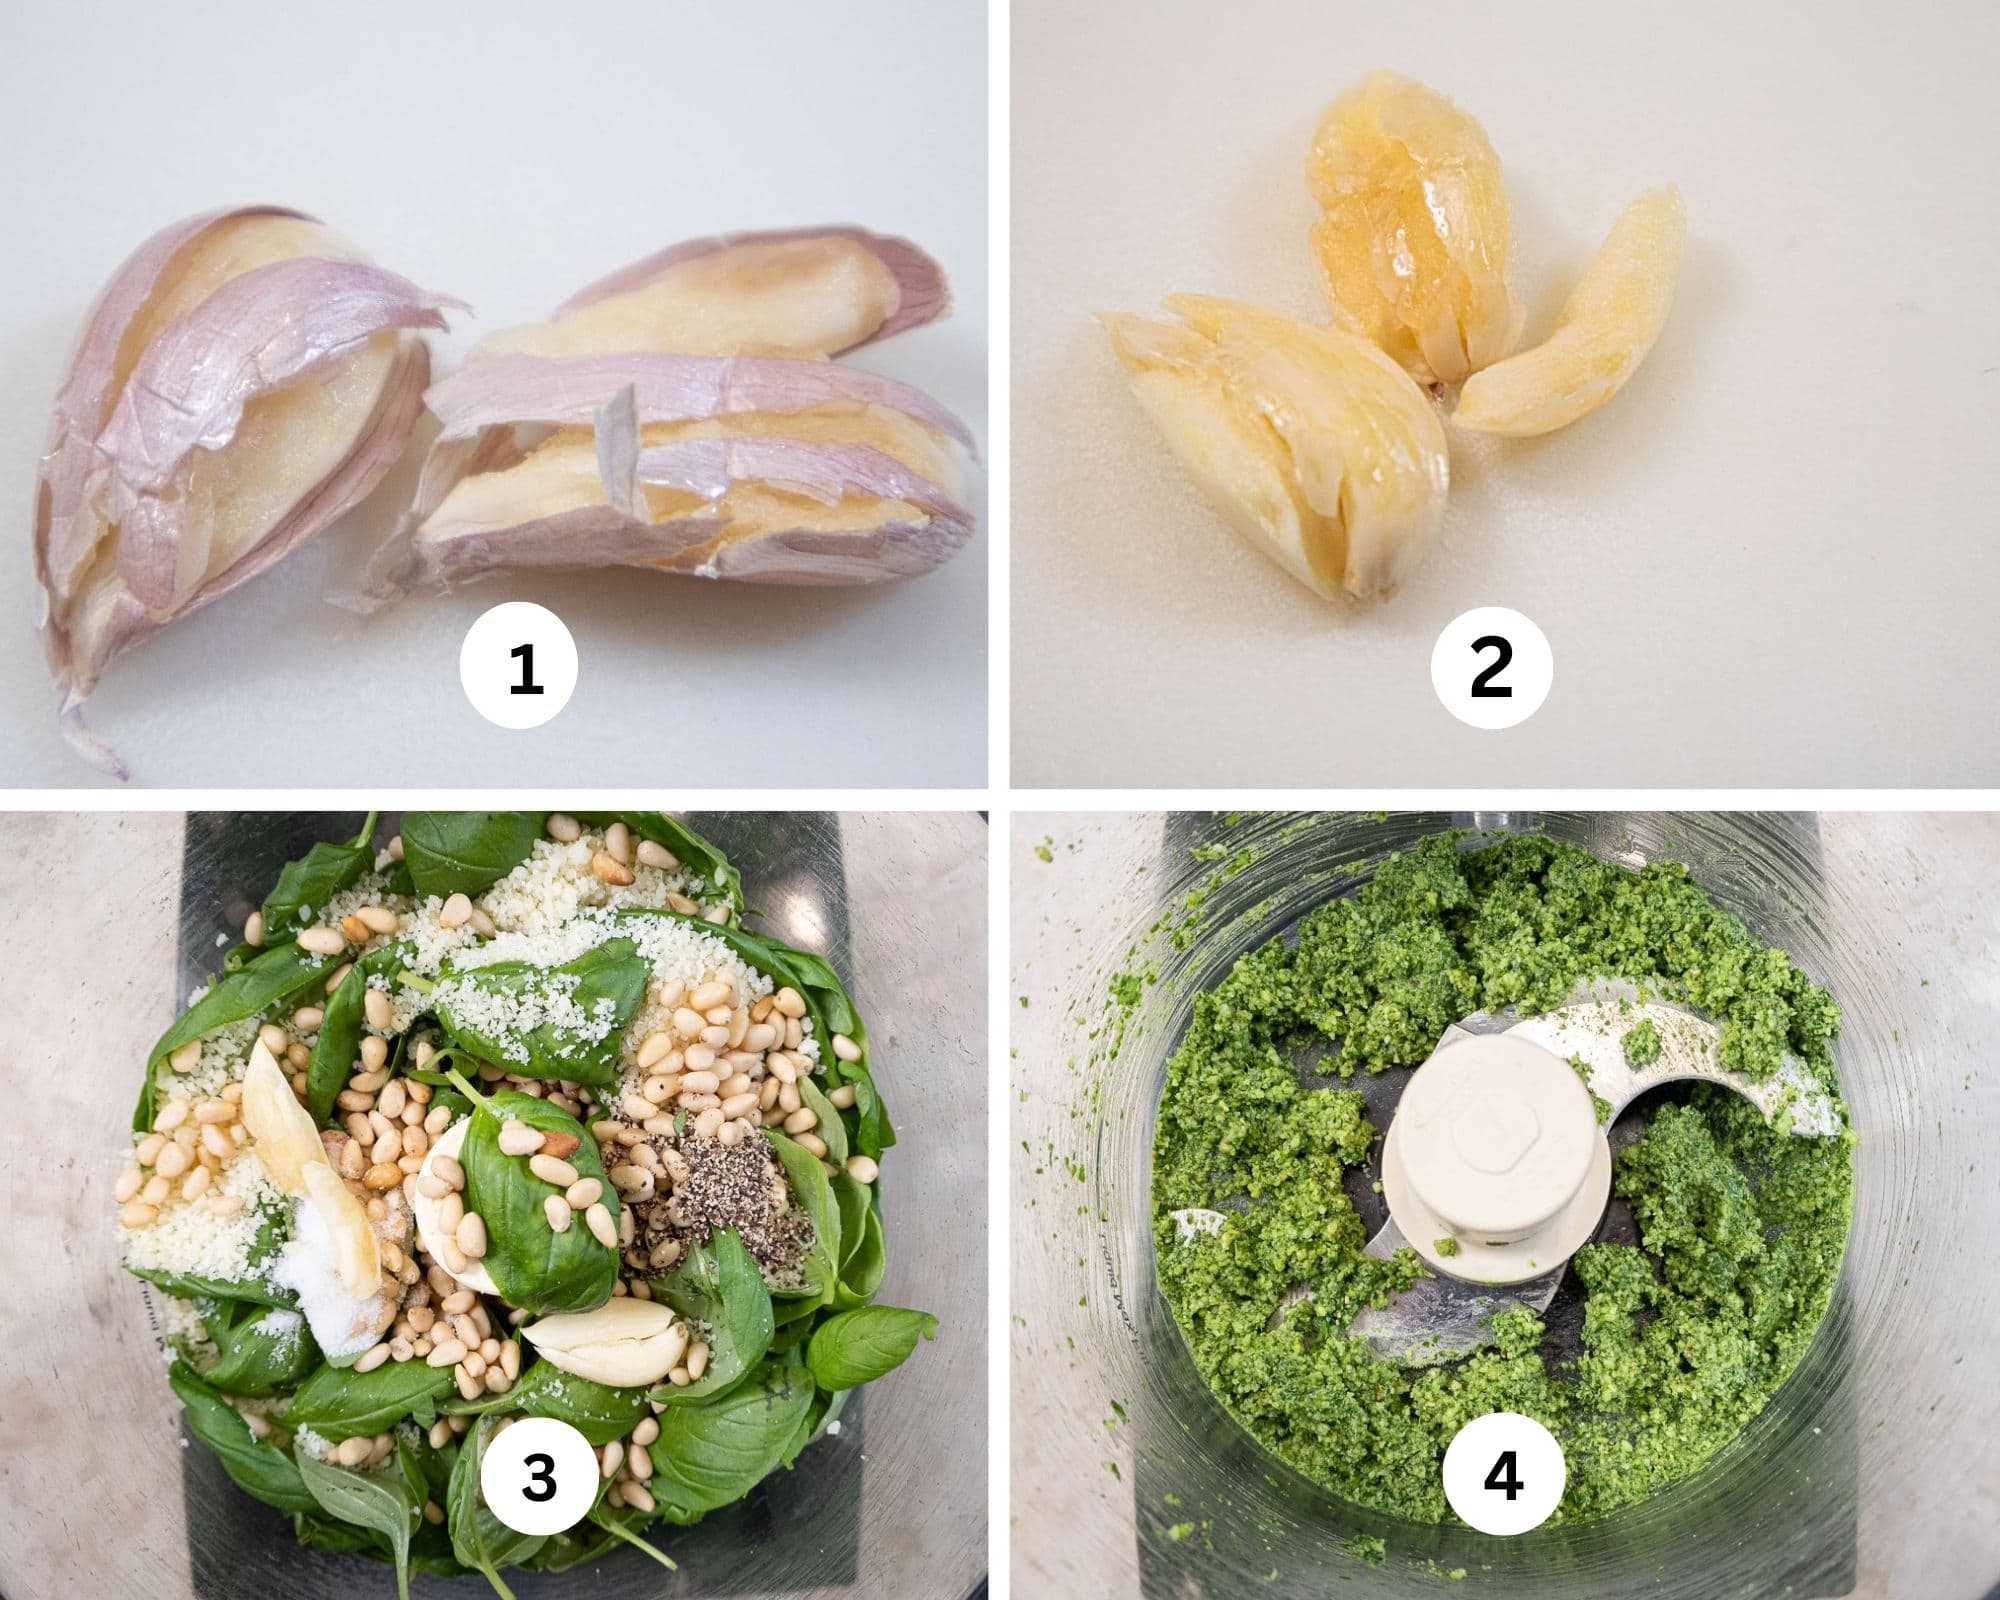 Pesto ingredients are garlic cloves, all ingredients in the processor and processed.